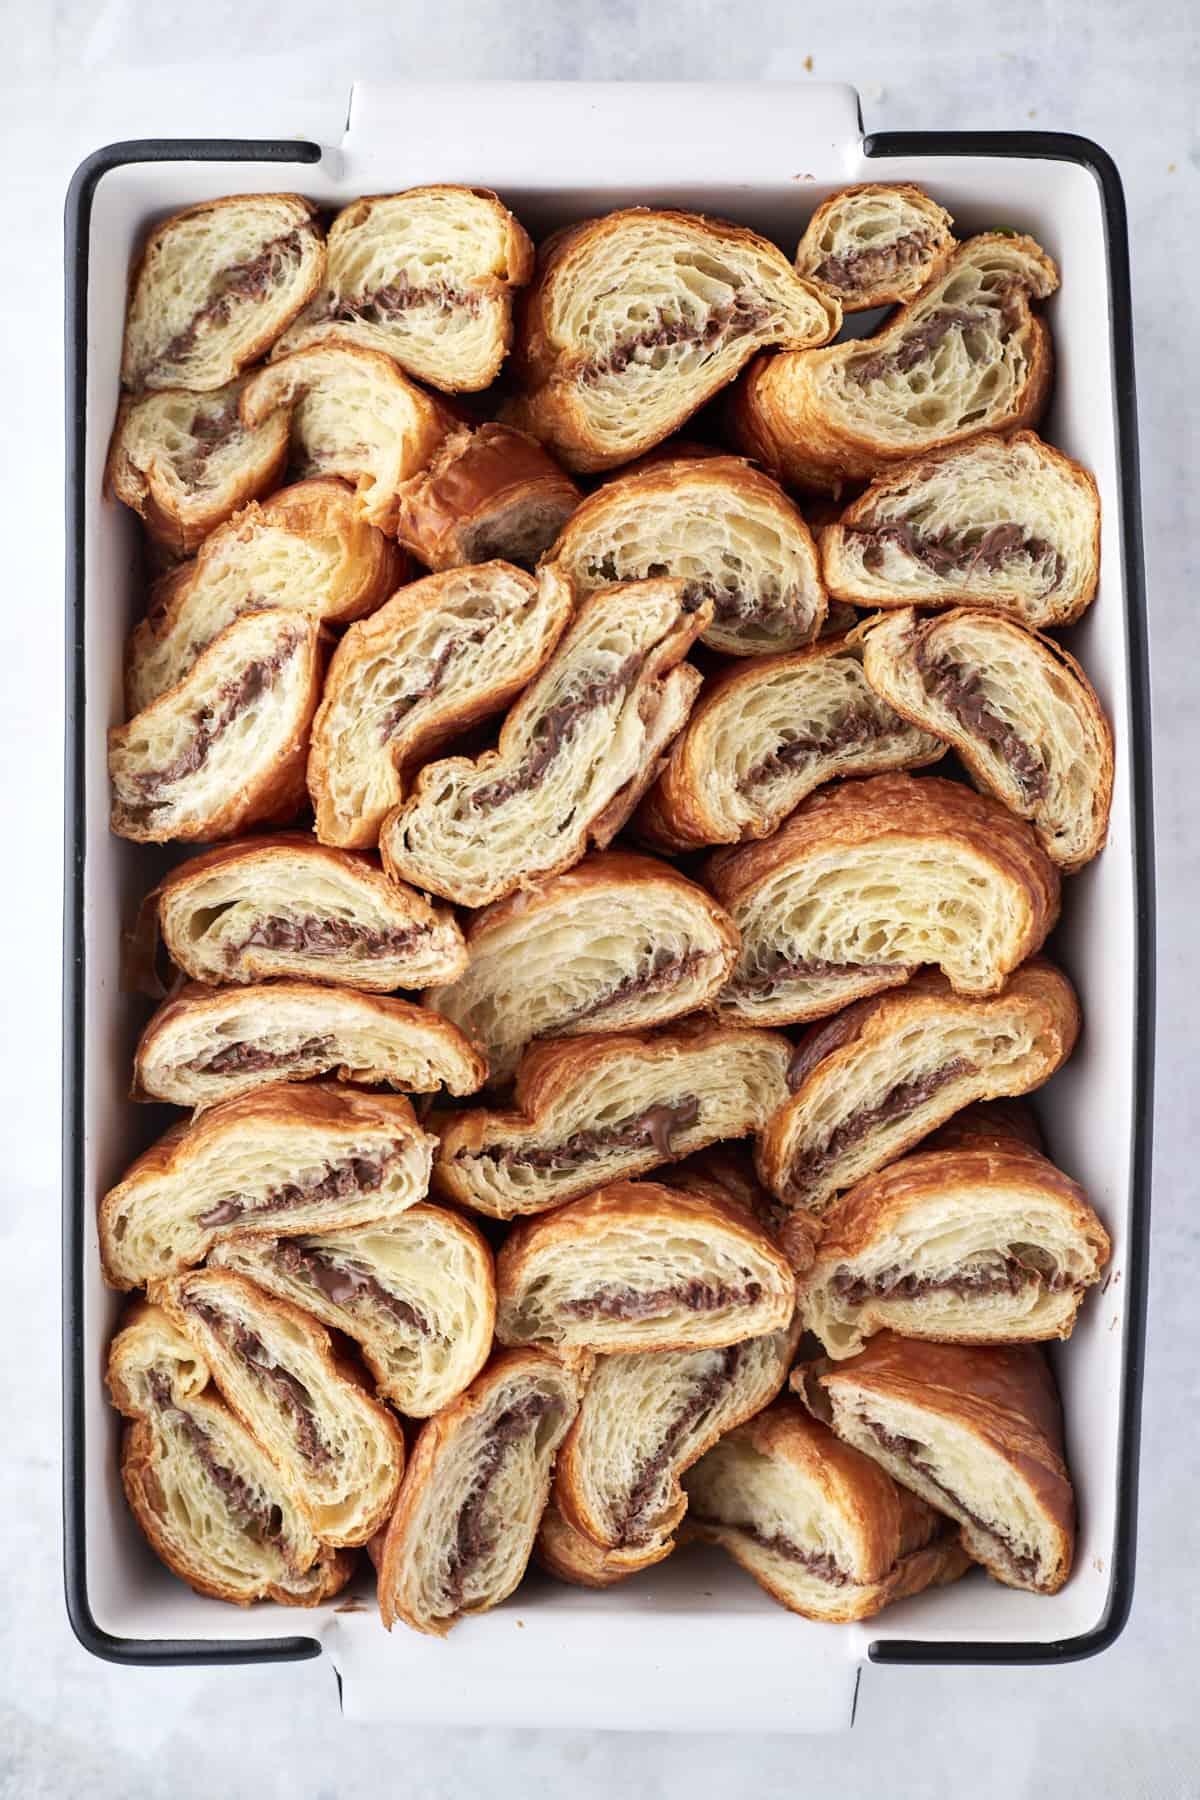 Freshly baked croissants with nutella on a white plate near